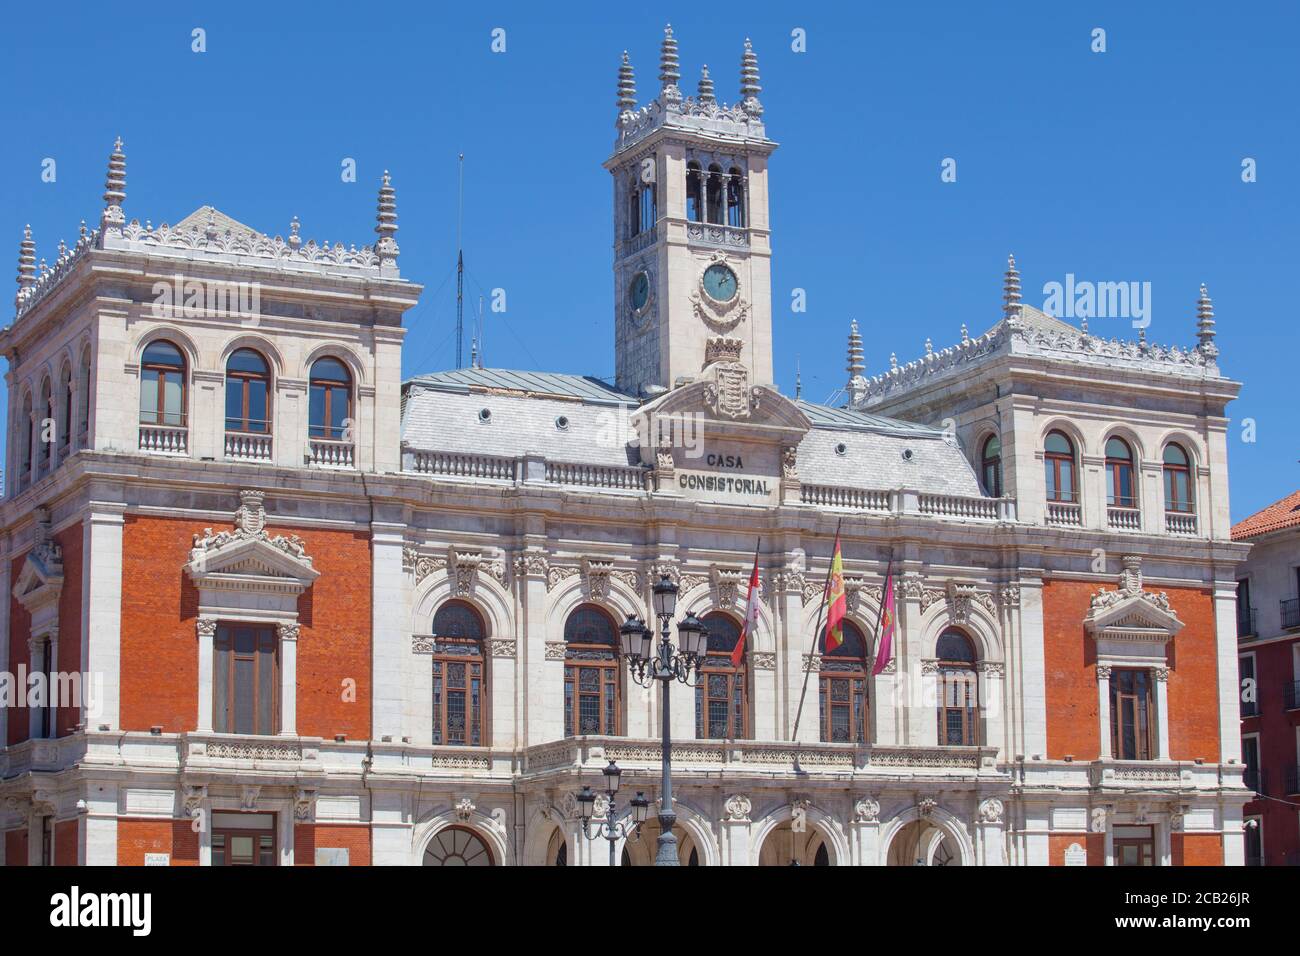 Valladolid, Spain - July 18th, 2020: Main Square or Plaza Mayor of Valladolid, Spain. Emblematic location of the city Stock Photo